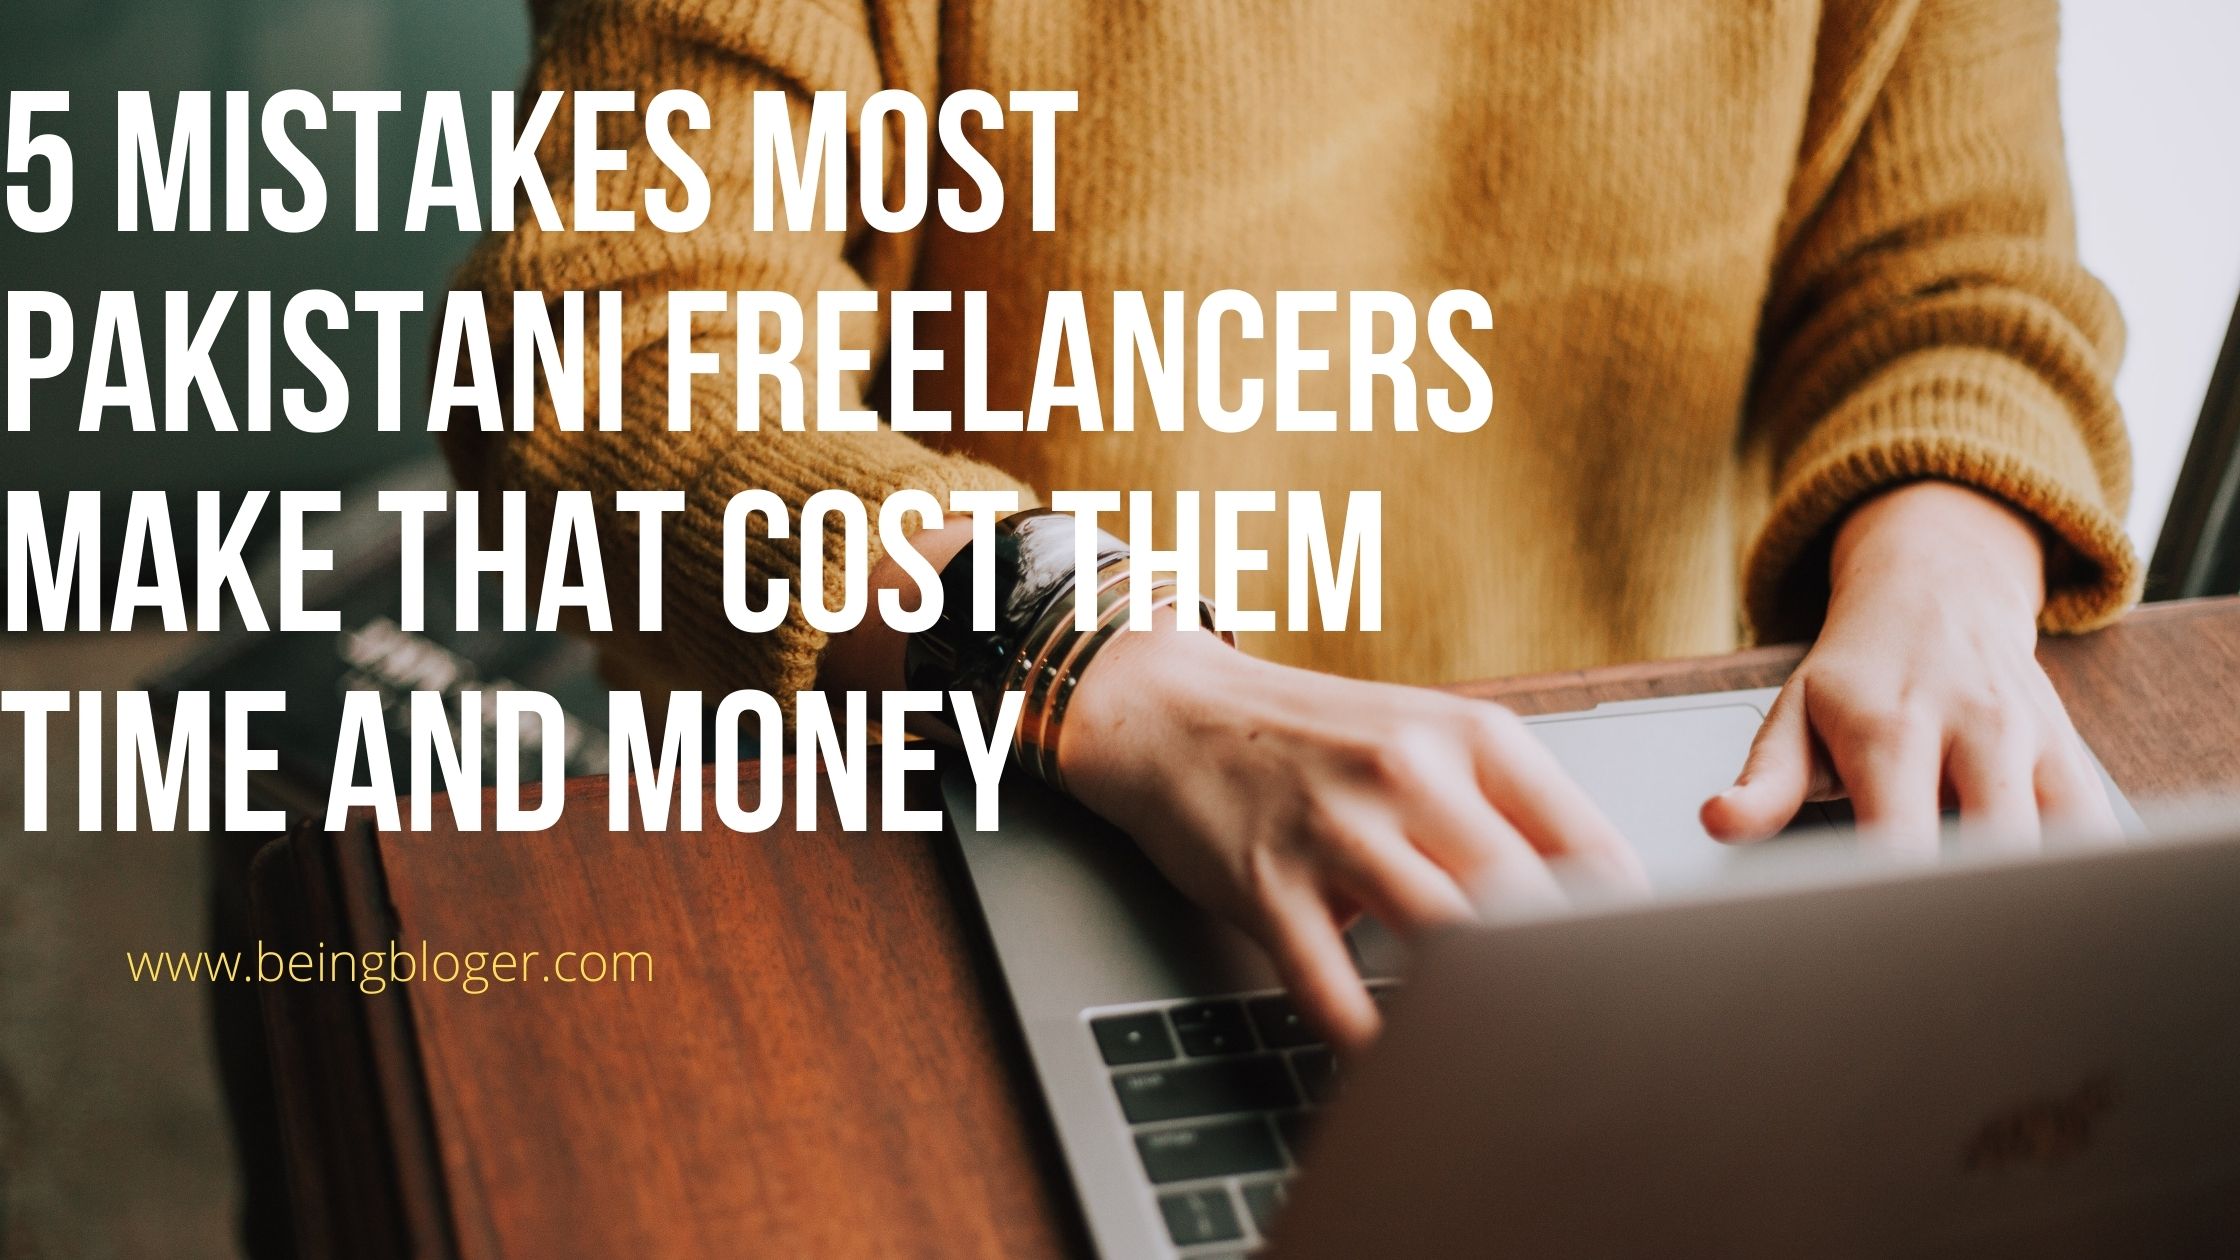 5 Mistakes Most Pakistani Freelancers Make that Cost Them Time and Money